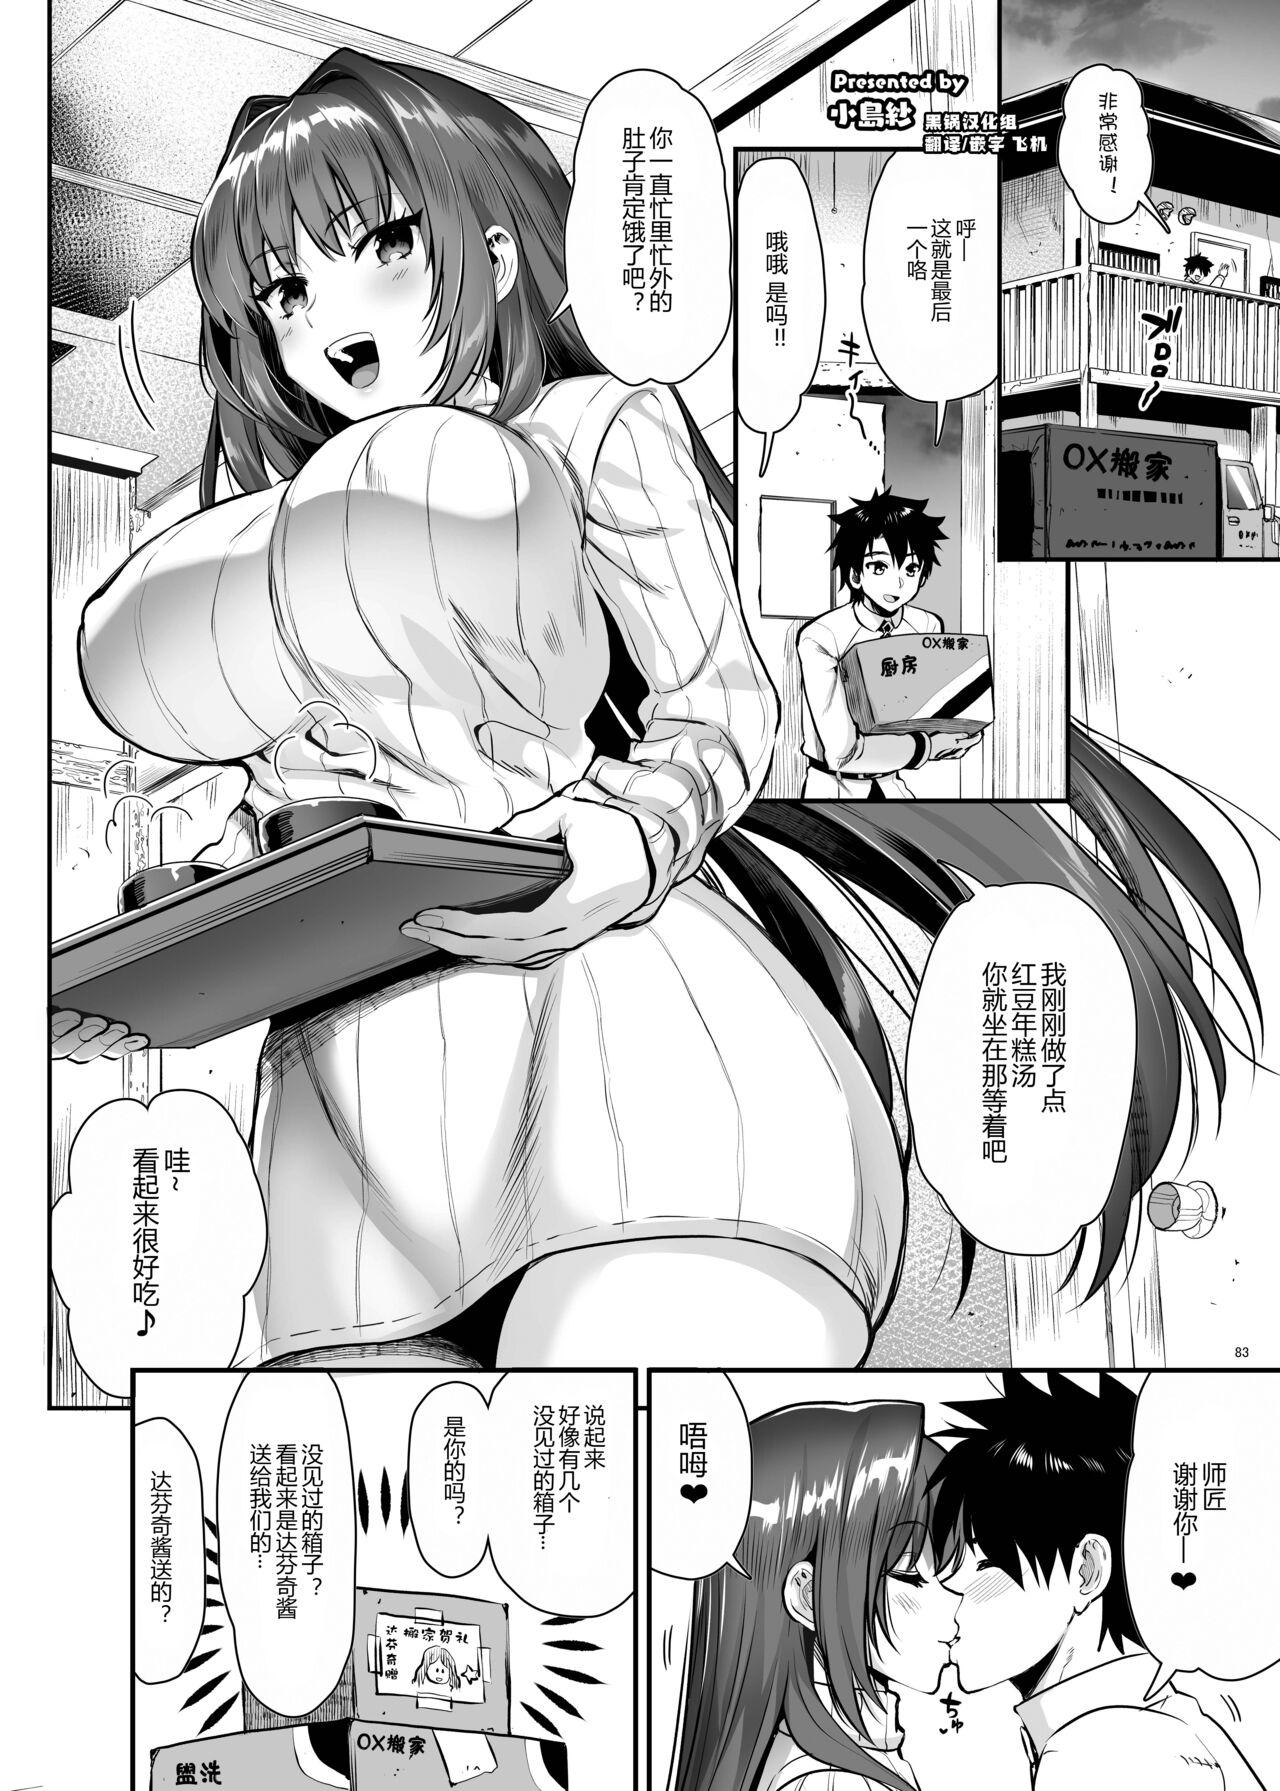 Ametur Porn Scathach - Fate grand order Roludo - Page 1